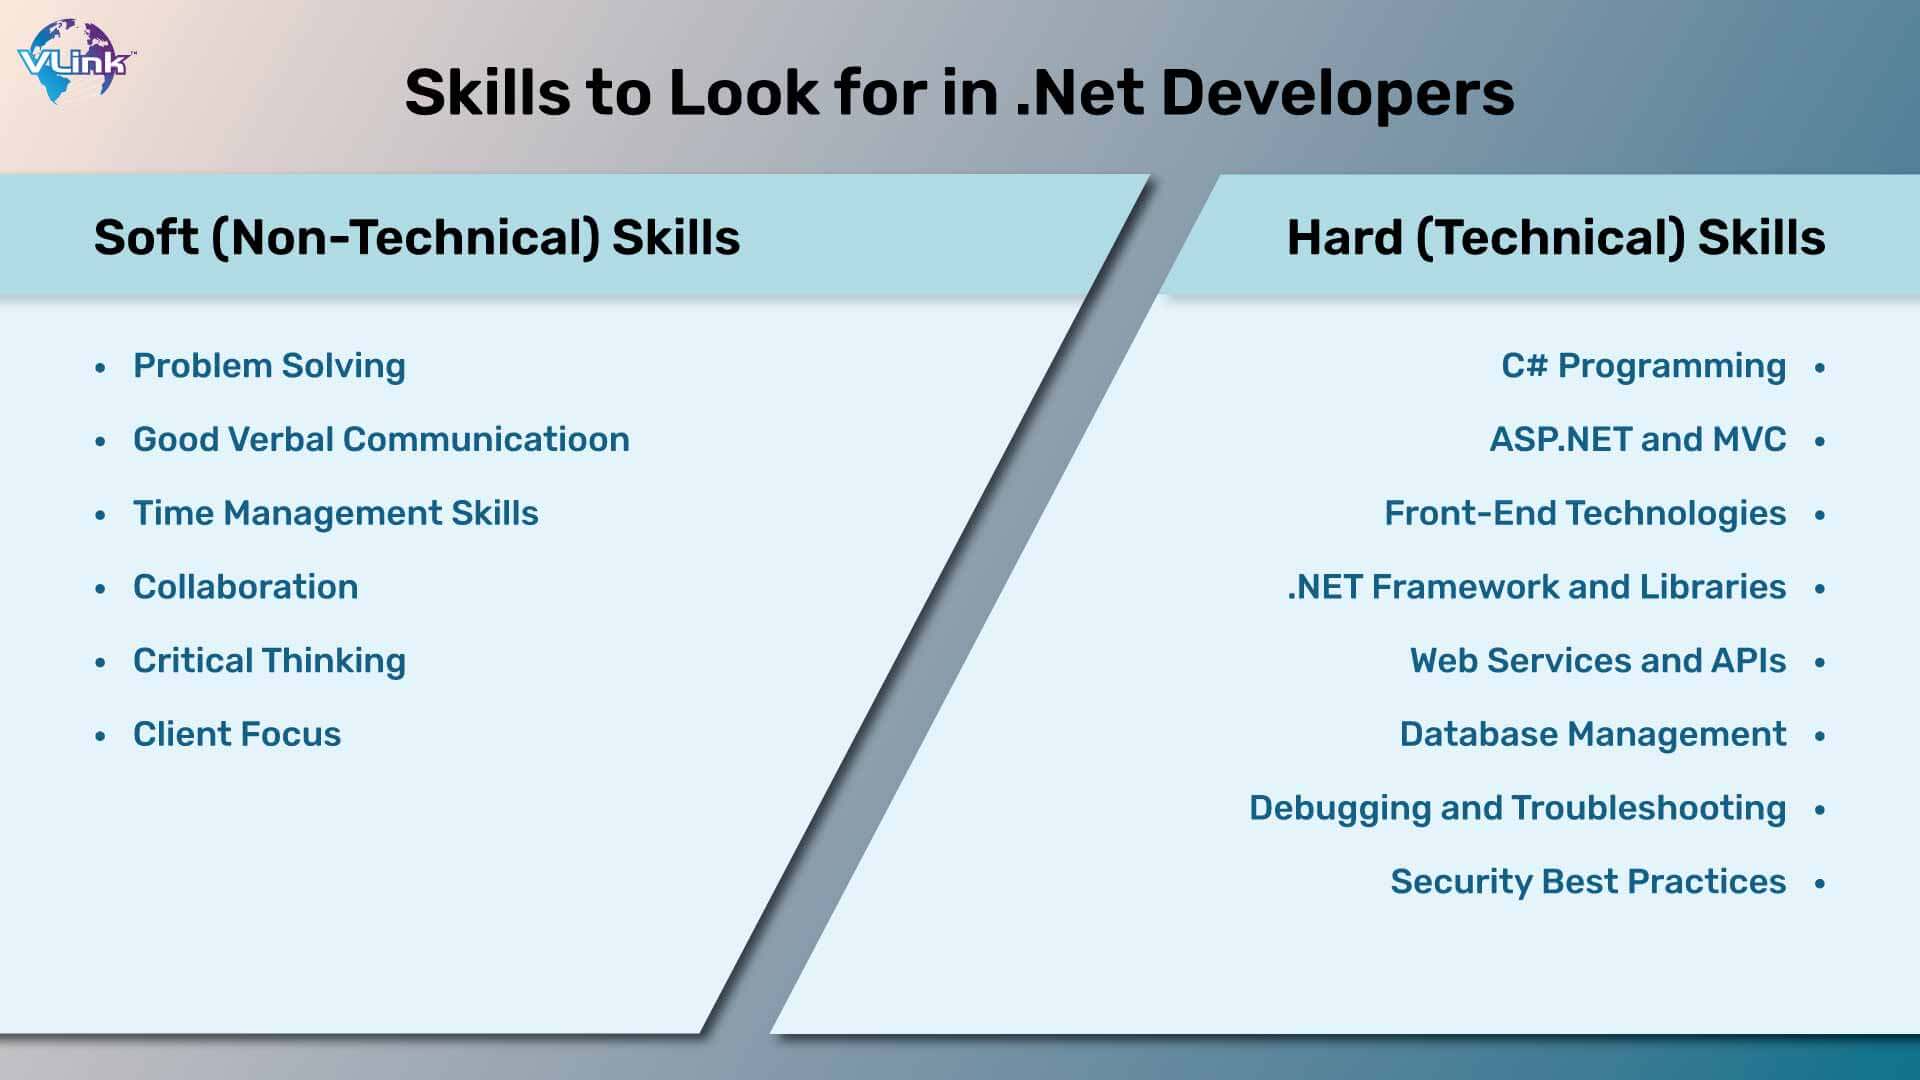 Skills to Look for in .Net Developers